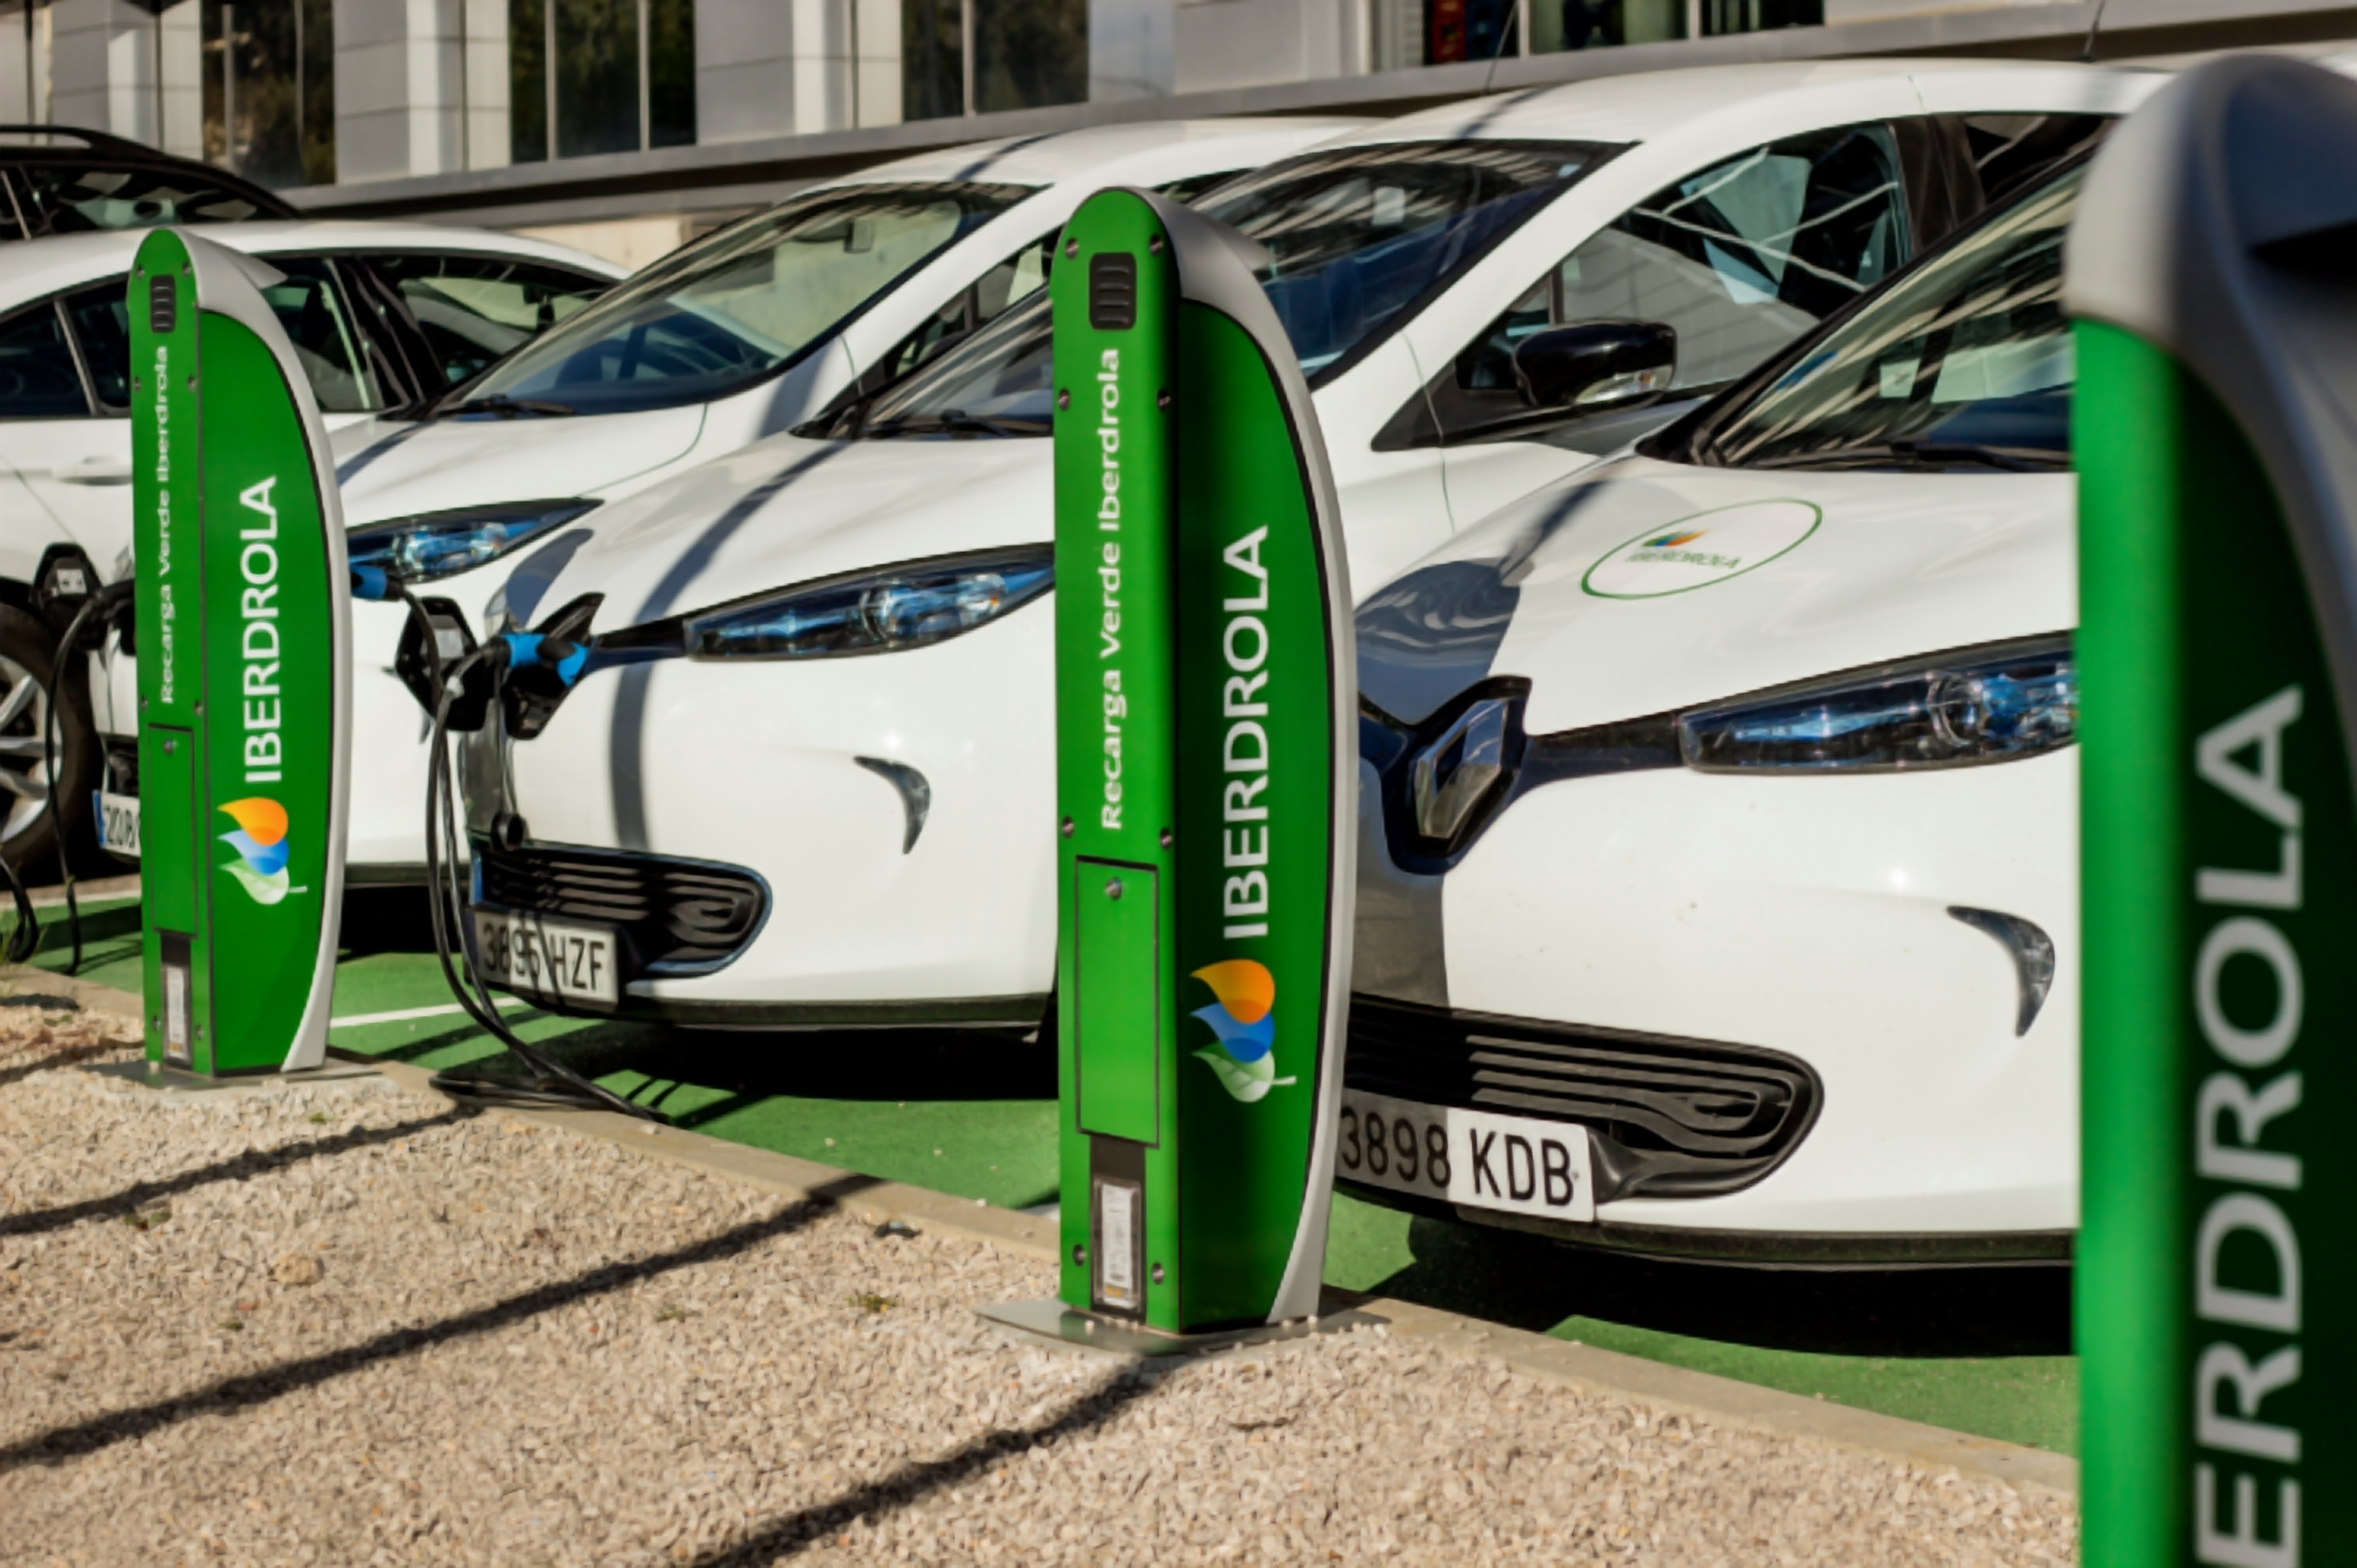 Iberdrola and bp to Cooperate to Expedite Development of EV Charging Infrastructure and Production of Green Hydrogen